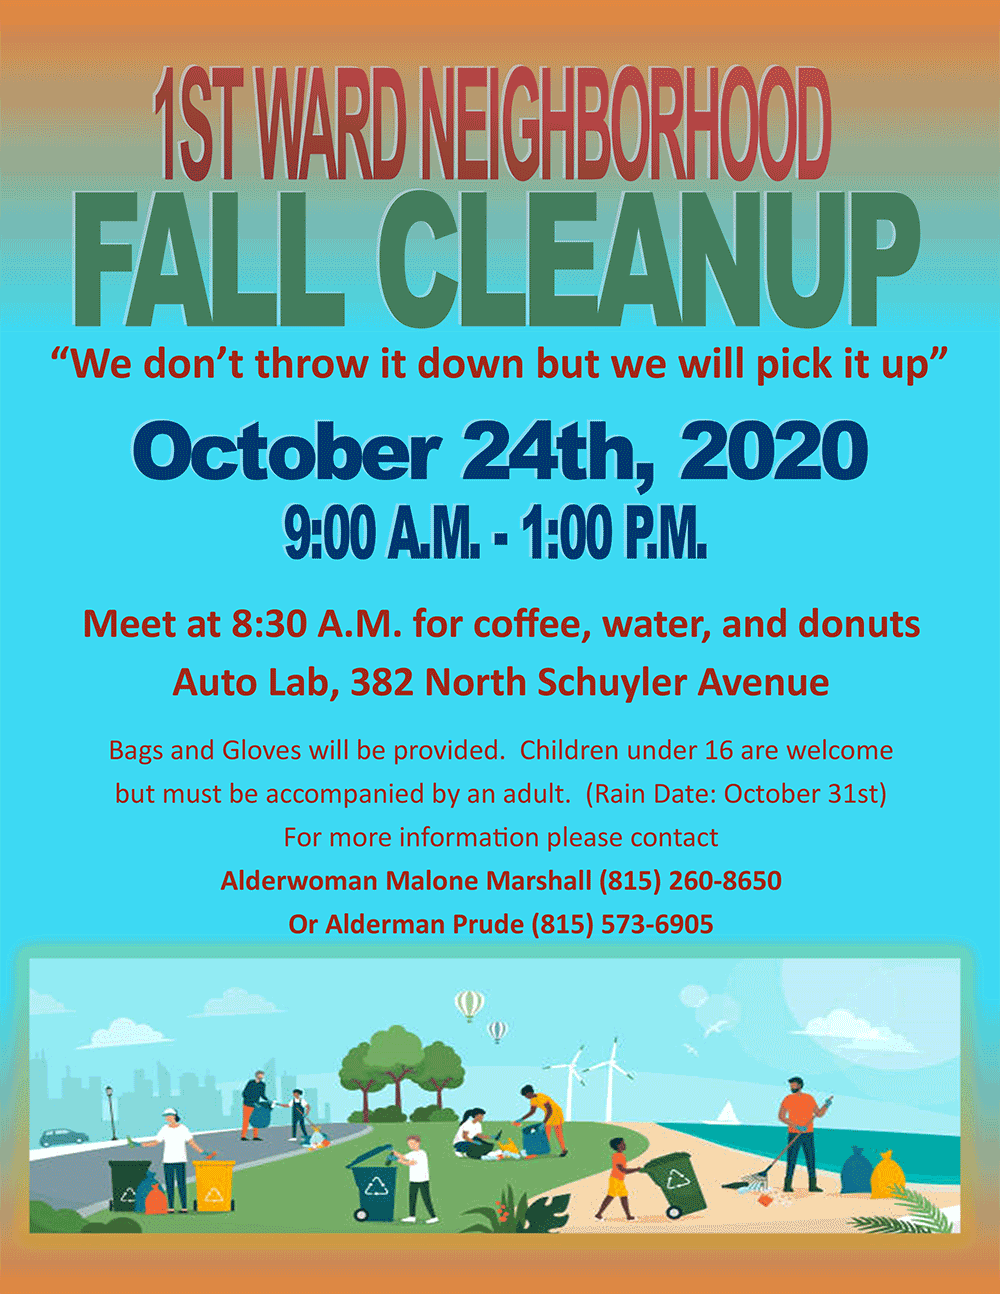 COMMUNITY CLEANUP